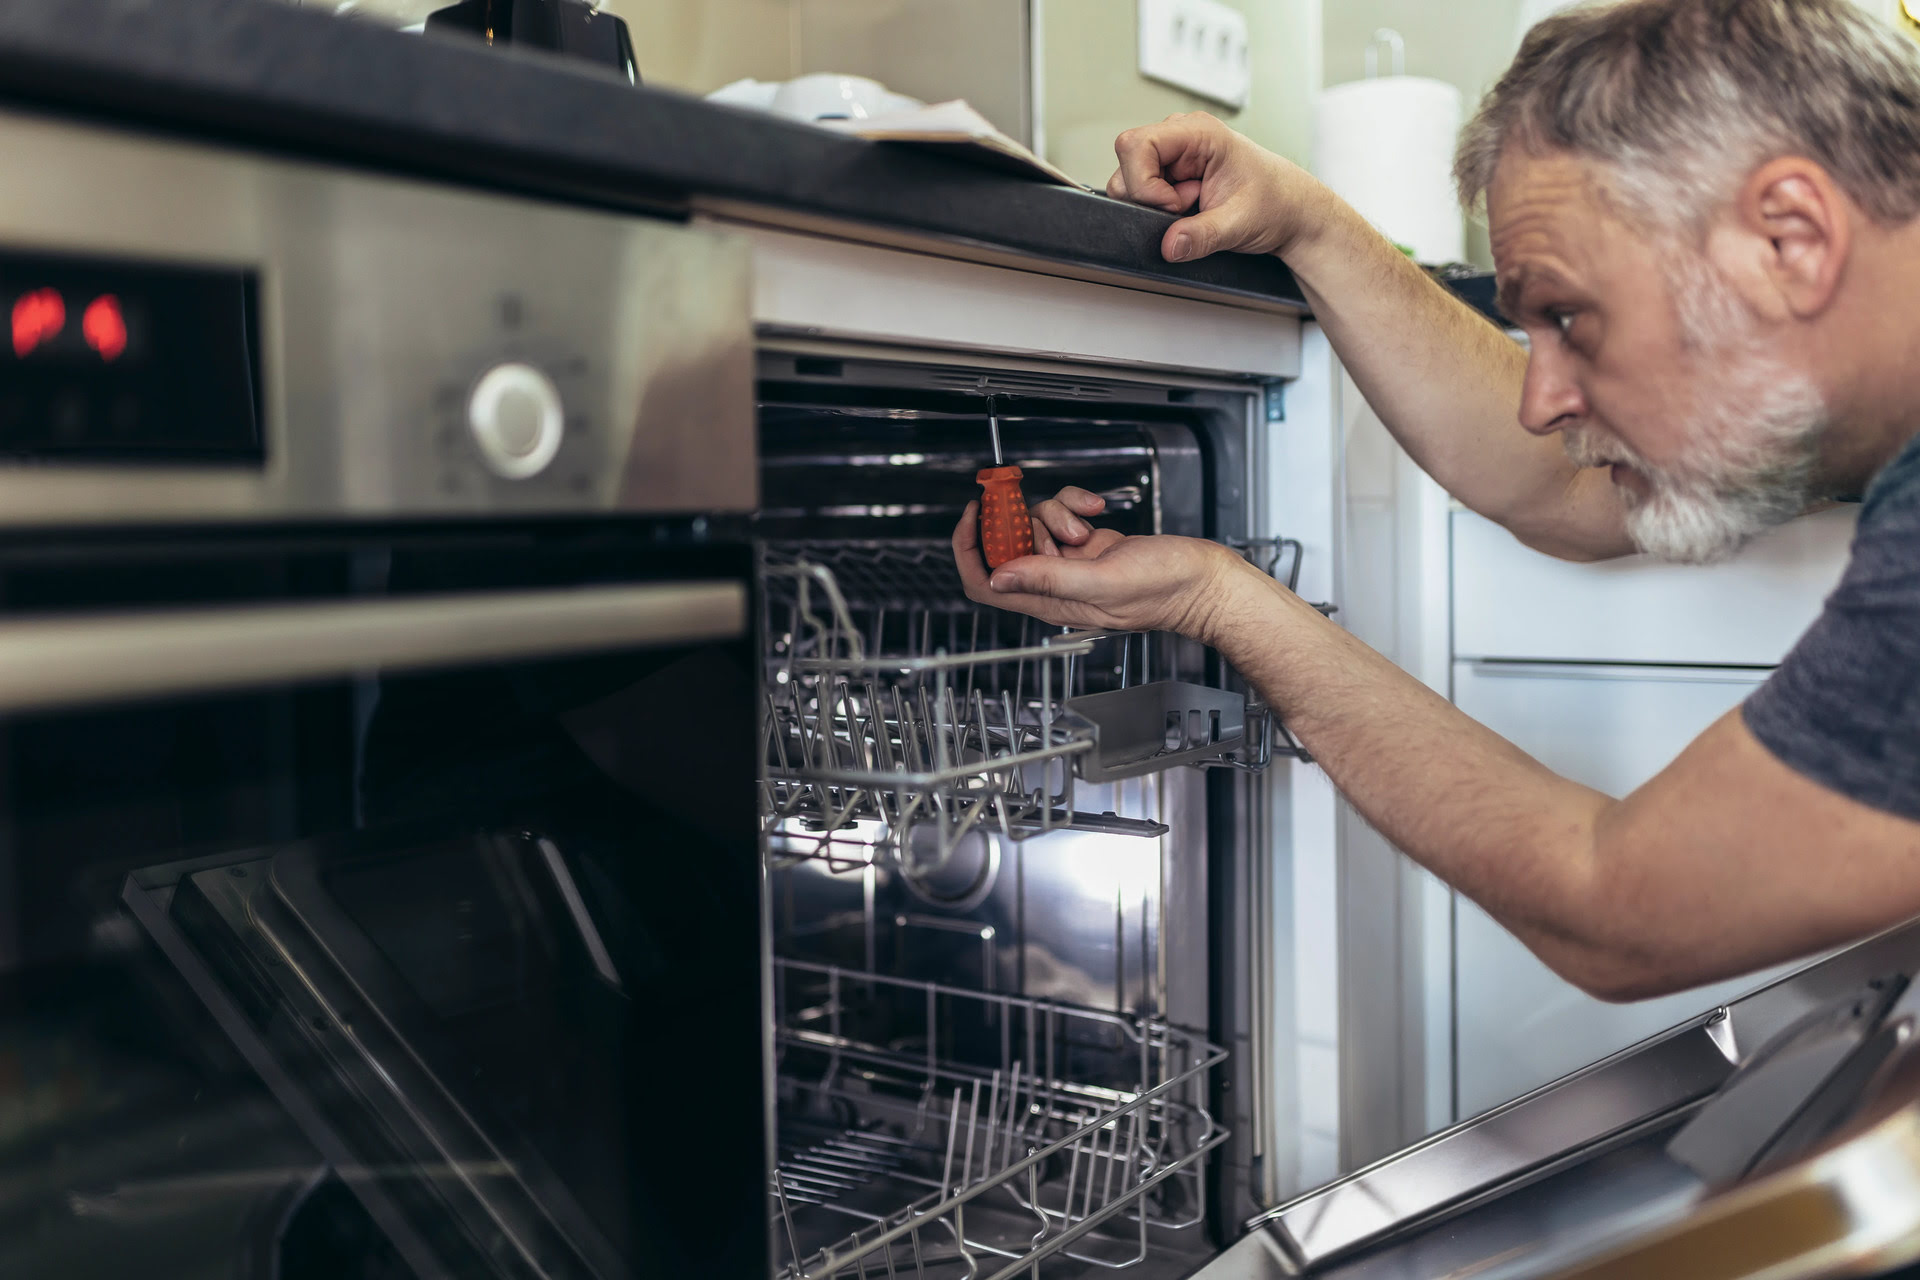 How To Install Frigidaire Dishwasher | Storables